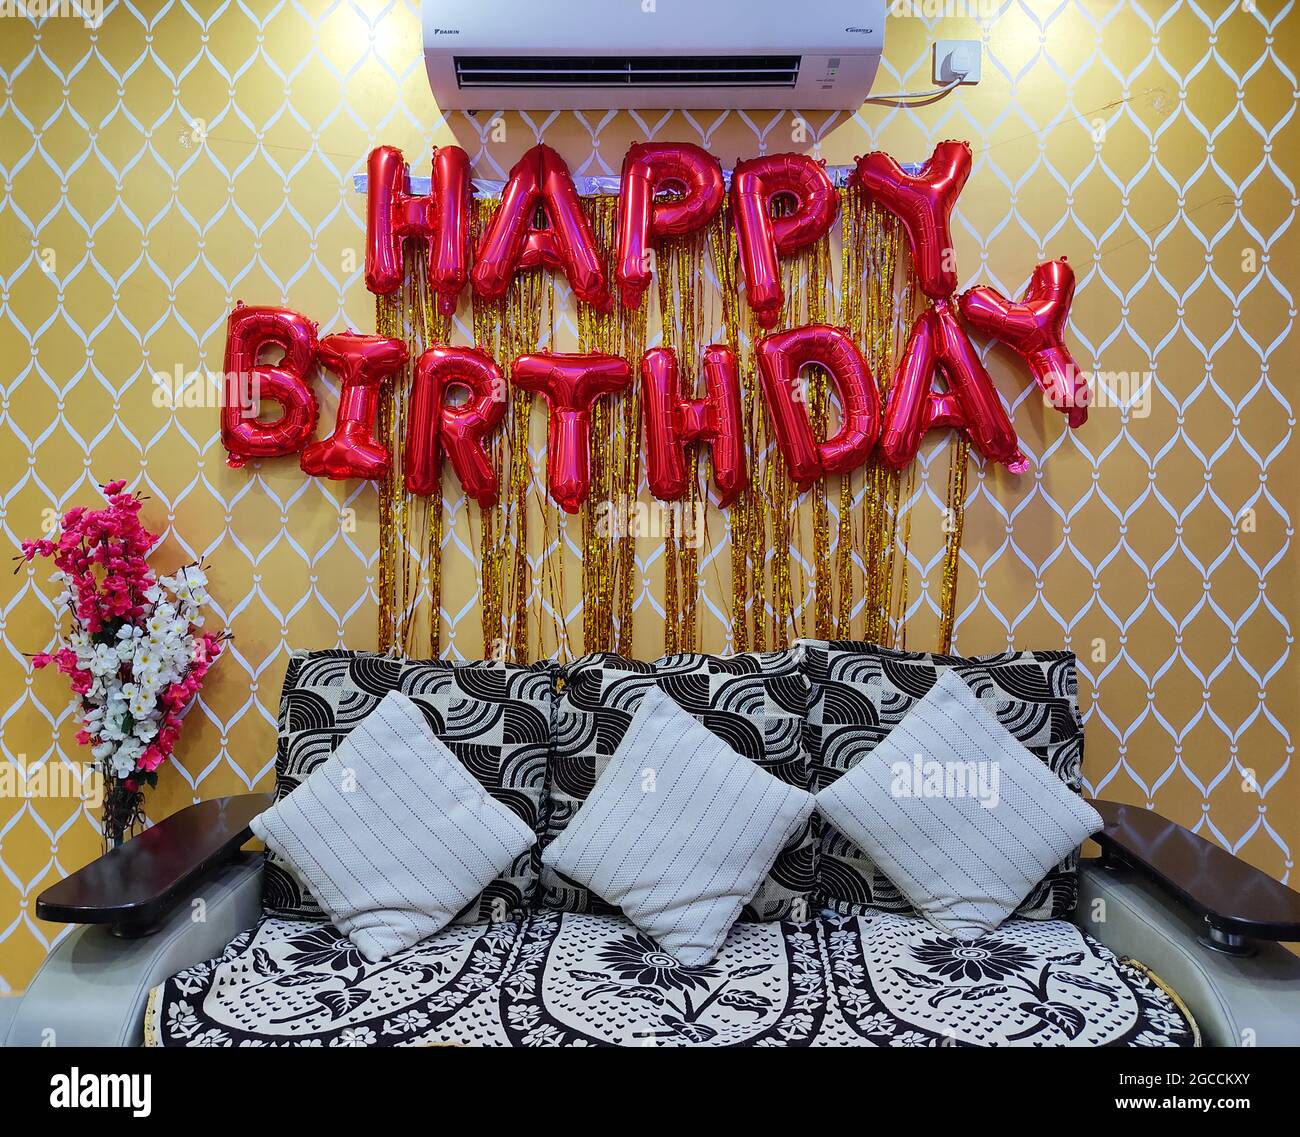 Happy Birthday Golden Balloon Hanging Banner on Wall. Birthday  Party Decorations. Home Interior. Stock Photo